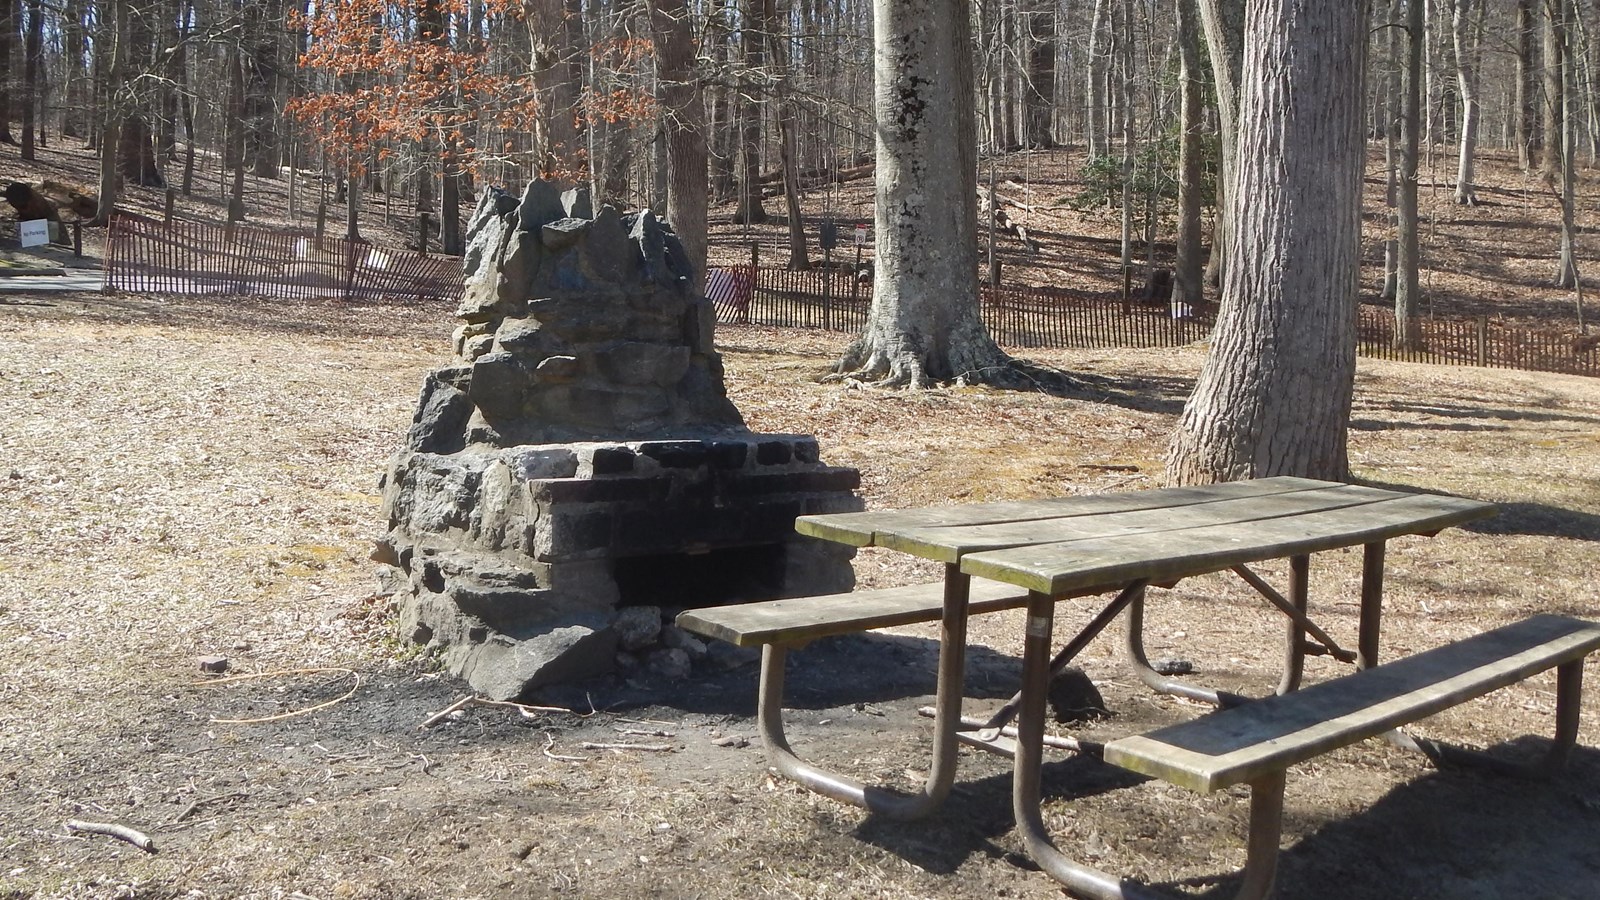 A stone chimney and picnic table